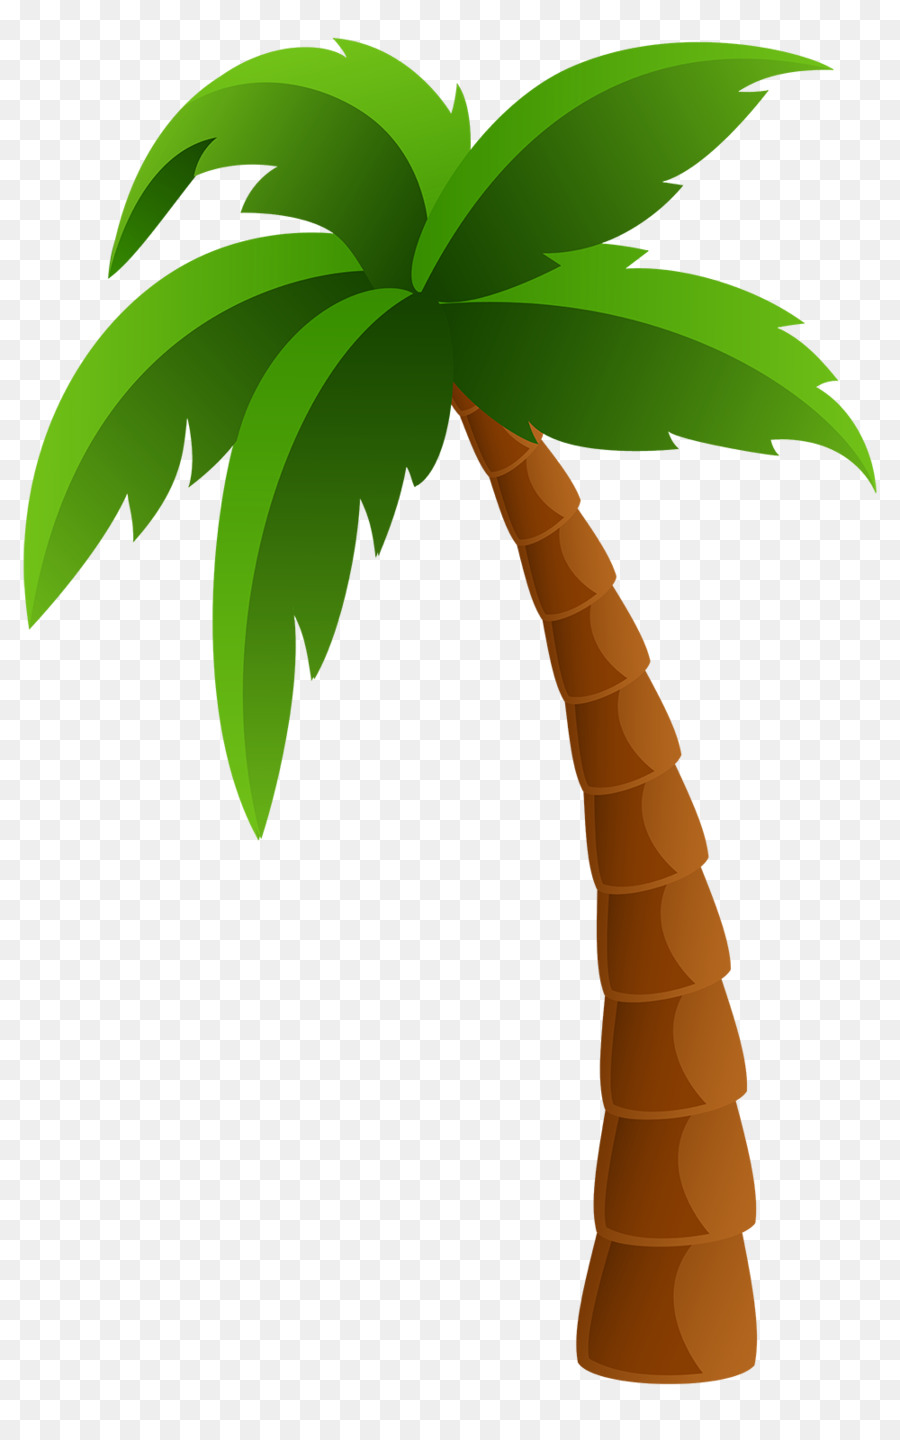 Coconut Clipart Palm Tree and other clipart images on 